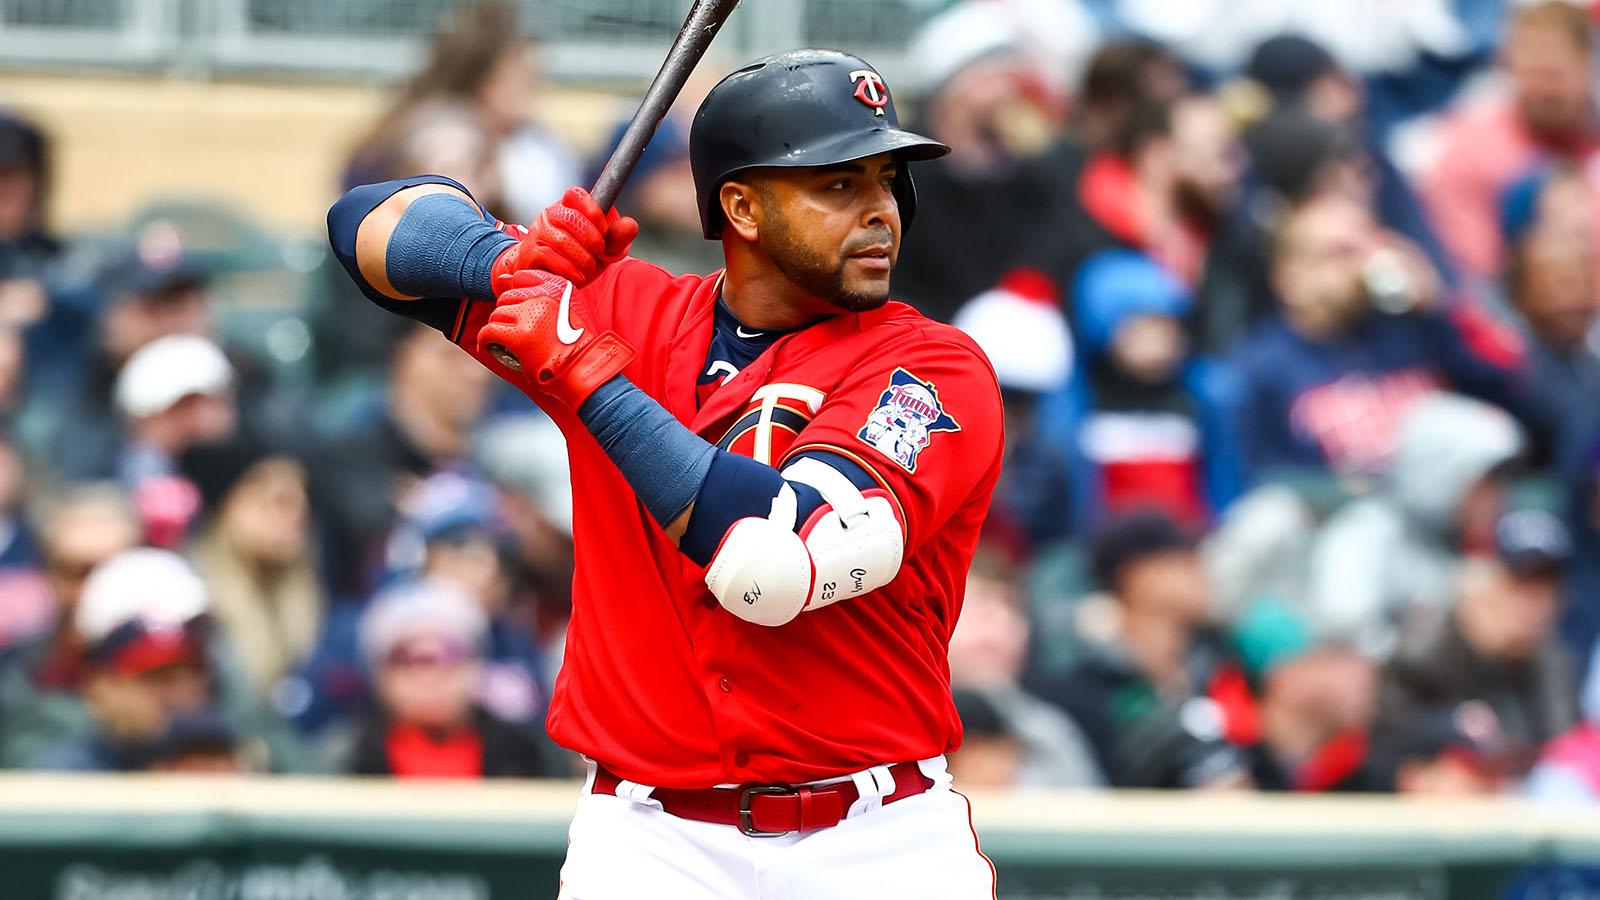 Out of Left Field: What does Nelson Cruz injury mean for the Twins